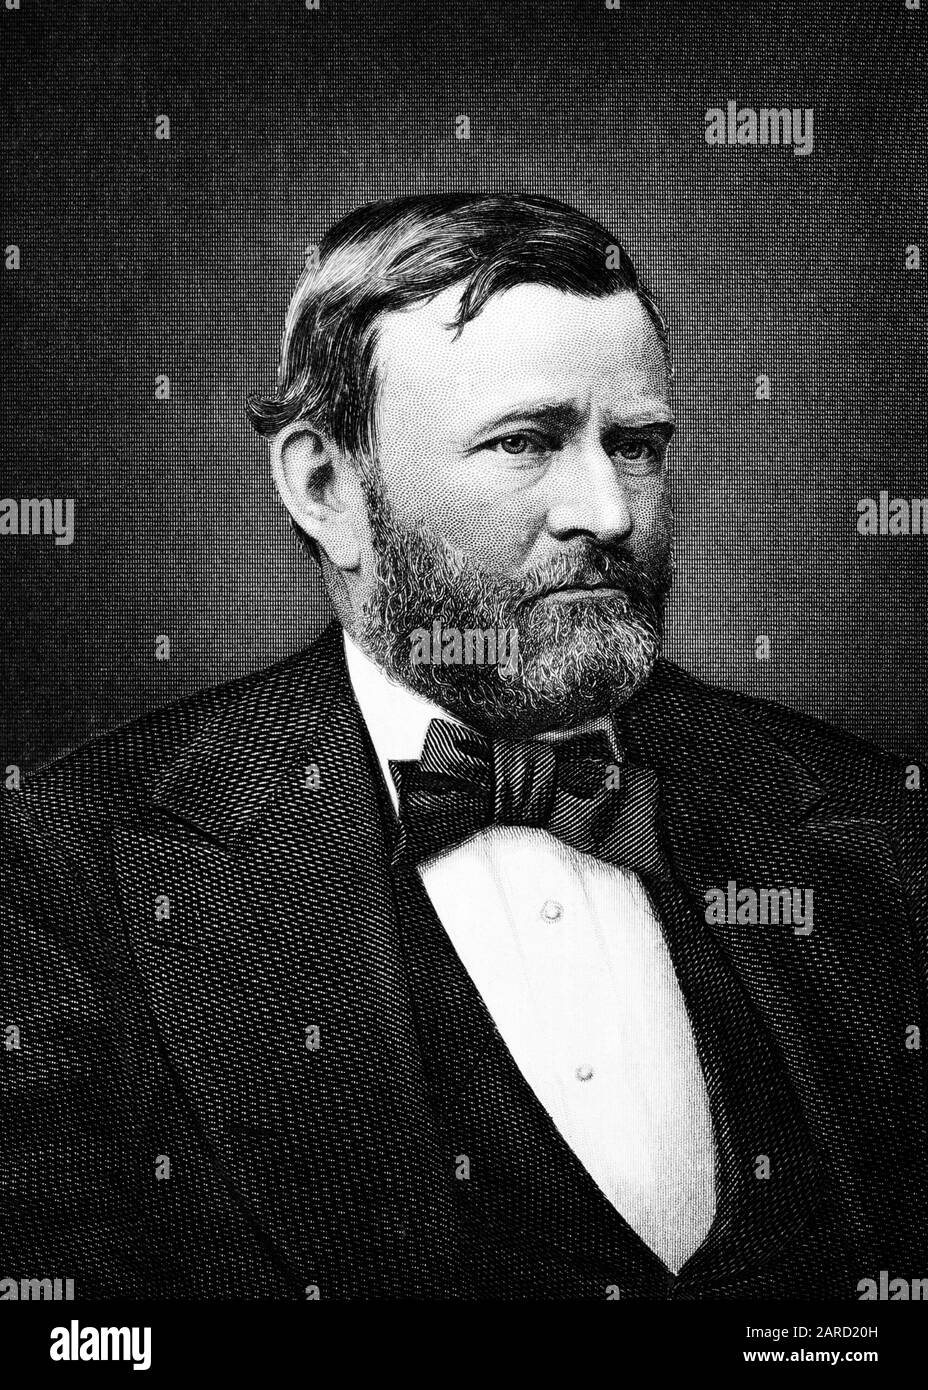 1800s 1860s GENERAL ULYSSES S. GRANT COMMANDING UNION OFFICER DURING AMERICAN CIVIL WAR AND 18TH PRESIDENT OF THE UNITED STATES - q49014 CPC001 HARS UNITED STATES OF AMERICA CHARACTER MALES OFFICER CONFIDENCE MIDDLE-AGED 1800s B&W MIDDLE-AGED MAN EYE CONTACT SUCCESS MUSTACHE WARS PERSONALITY HEAD AND SHOULDERS STRENGTH VICTORY STRATEGY UNION COURAGE AND REPUBLICAN WHISKER FAMOUS GRANT LEADERSHIP POLITICIAN POWERFUL ULYSSES INNOVATION OF THE AUTHORITY FACIAL HAIR OCCUPATIONS POLITICS PRESIDENTS S. SOUTHERN VICKSBURG COMMANDING CONCEPTUAL 1860s APPOMATTOX STYLISH COMMANDER ULYSSES S. GRANT Stock Photo